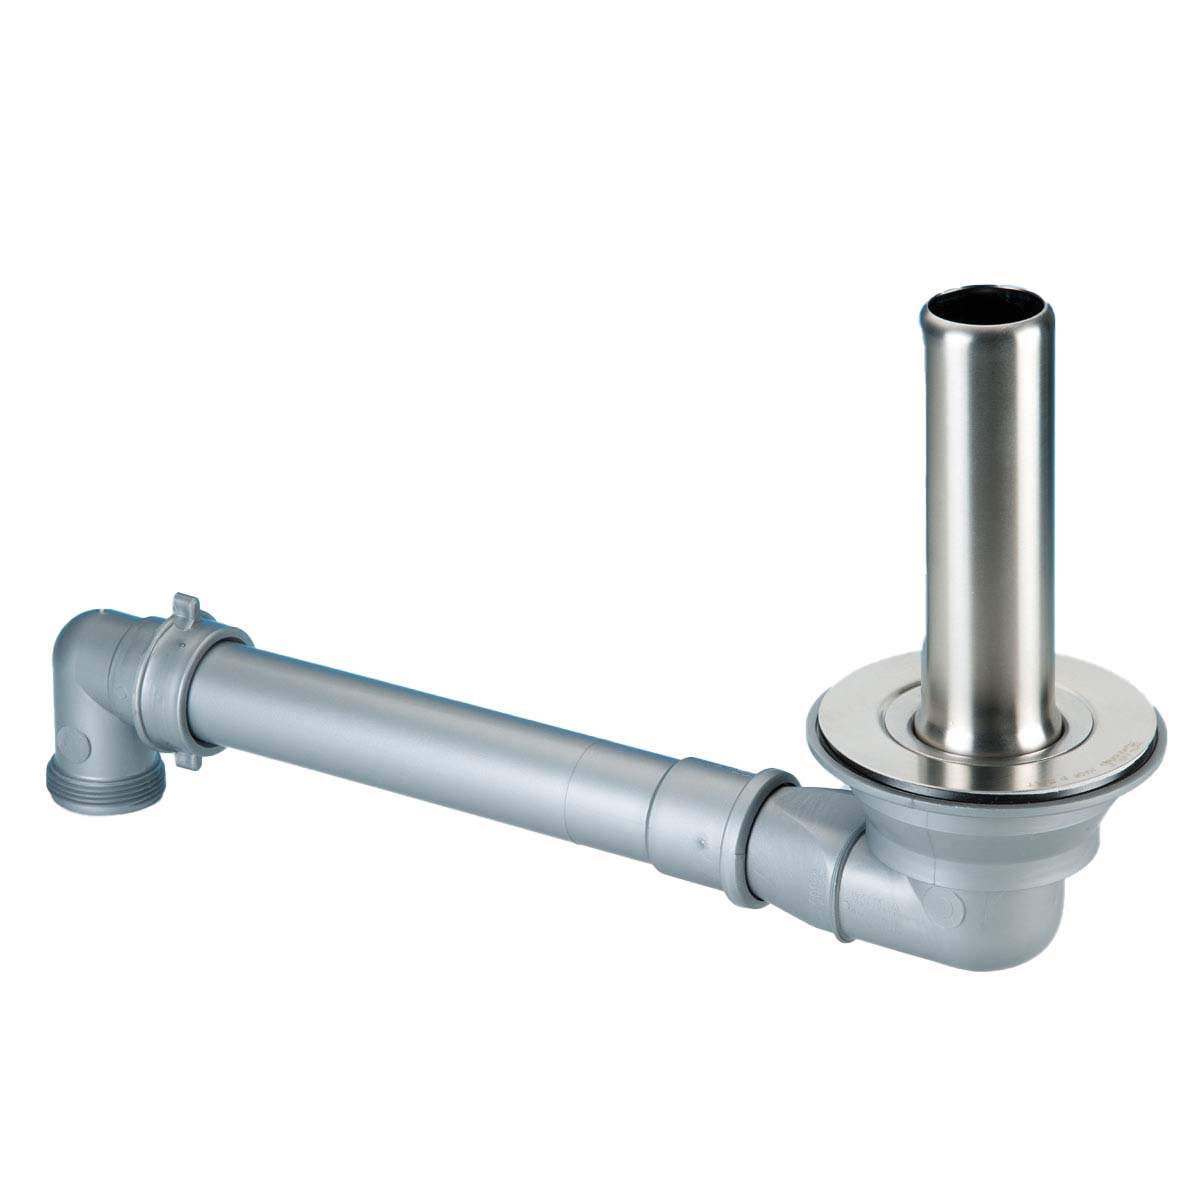 Space saving drain with 270mm stainless steel overflow tube for 90mm diameter sink